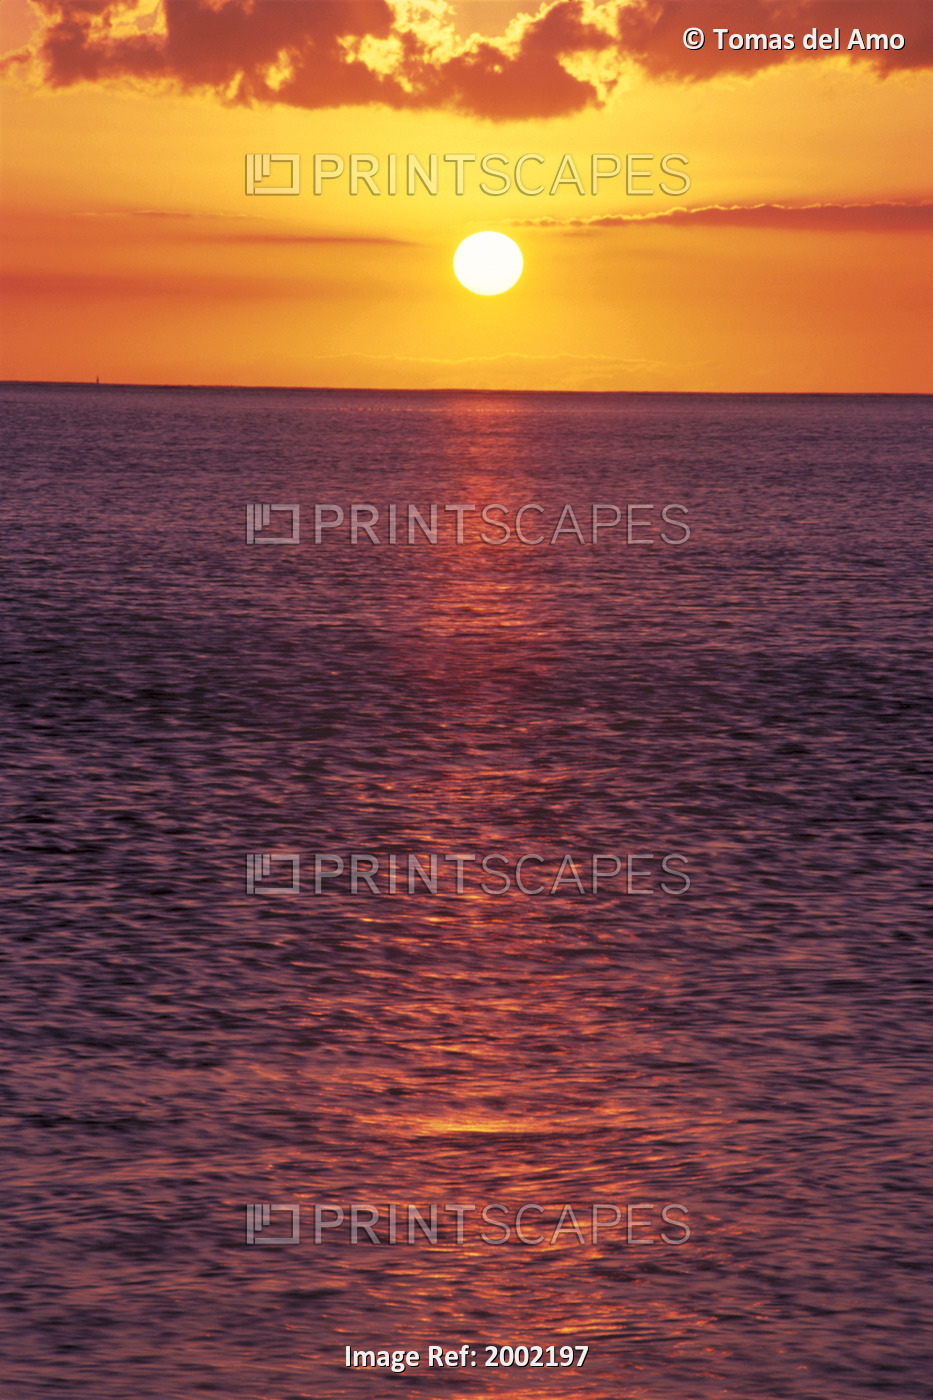 Golden Sun Ball, Sunset With Orange Sky Over Ocean Purple Surface With ...